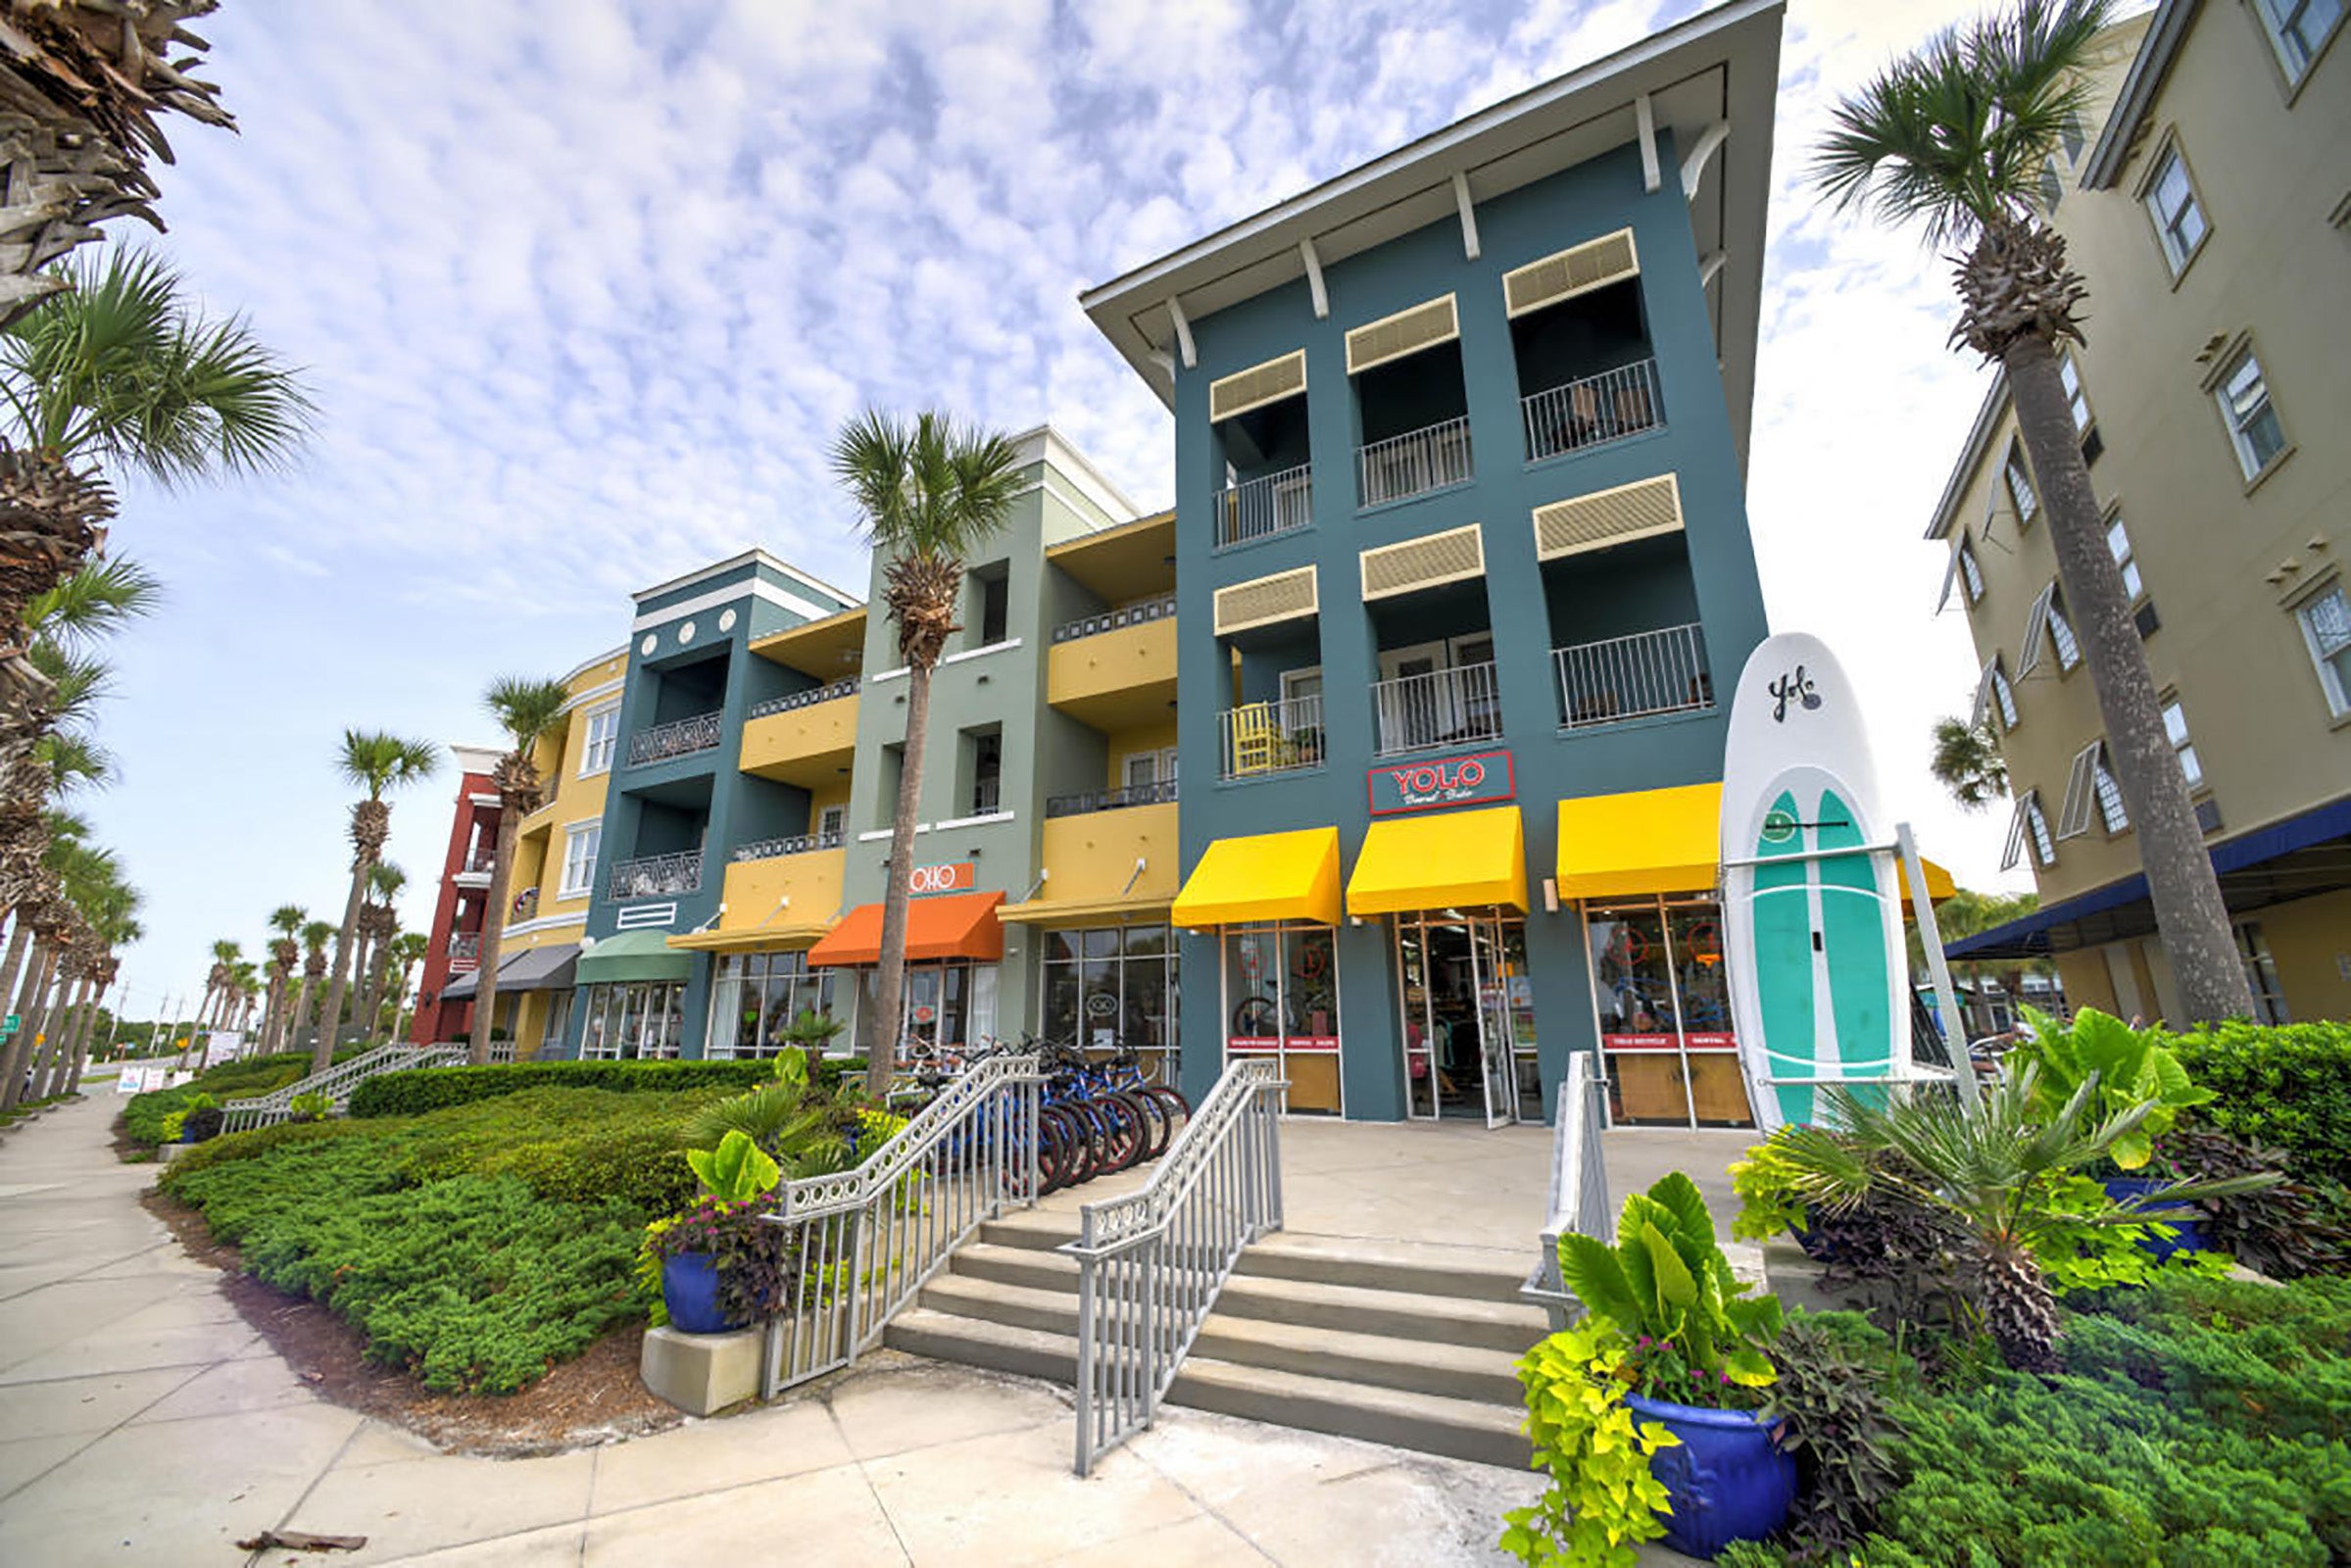 Visit Gulf Place for great shopping and dining